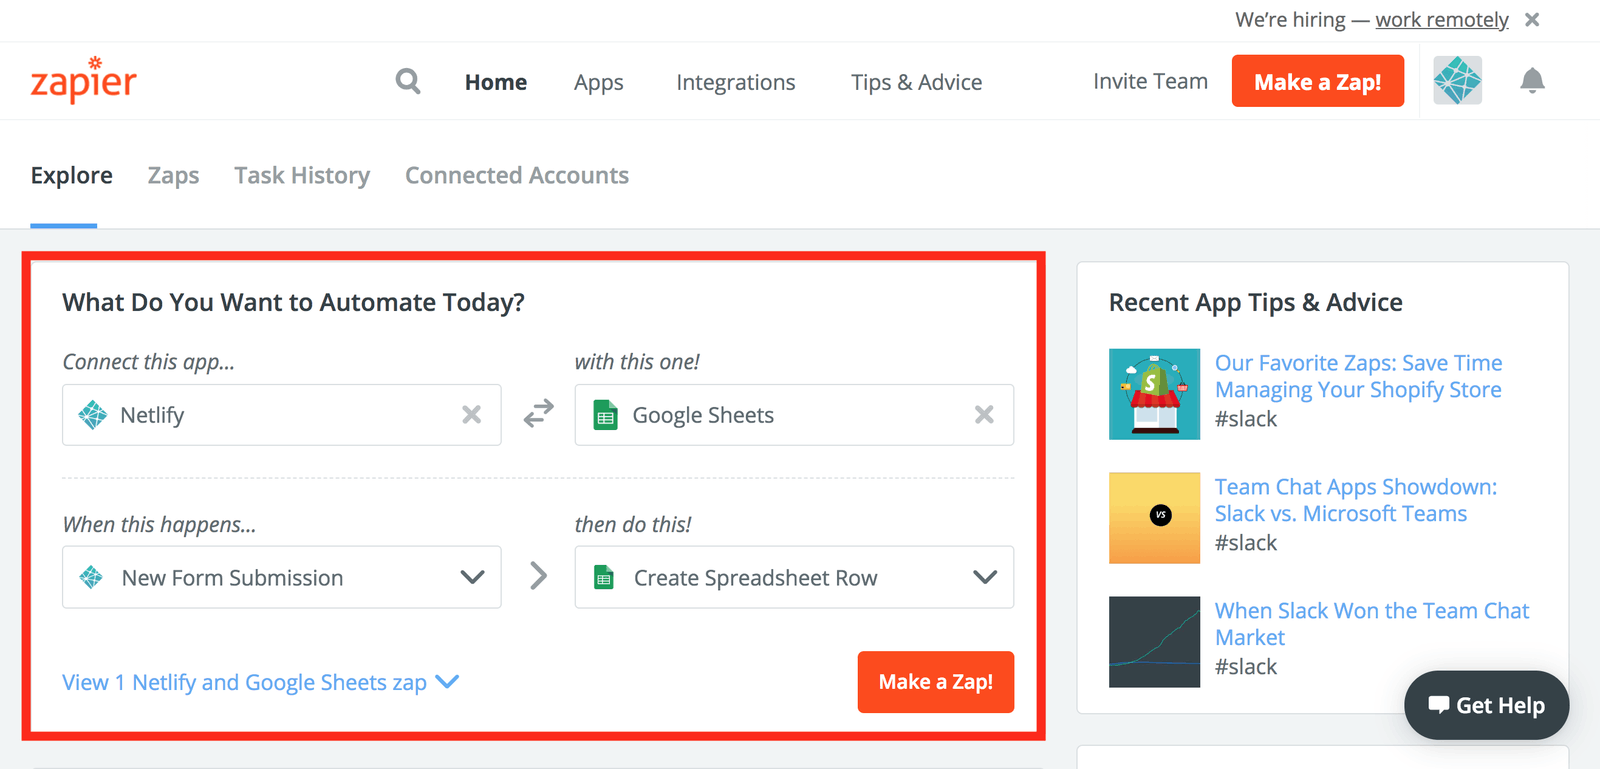 On the Zapier homepage, select Netlify and Google Sheets apps, then select New Form Submission and Create Spreadsheet Row.